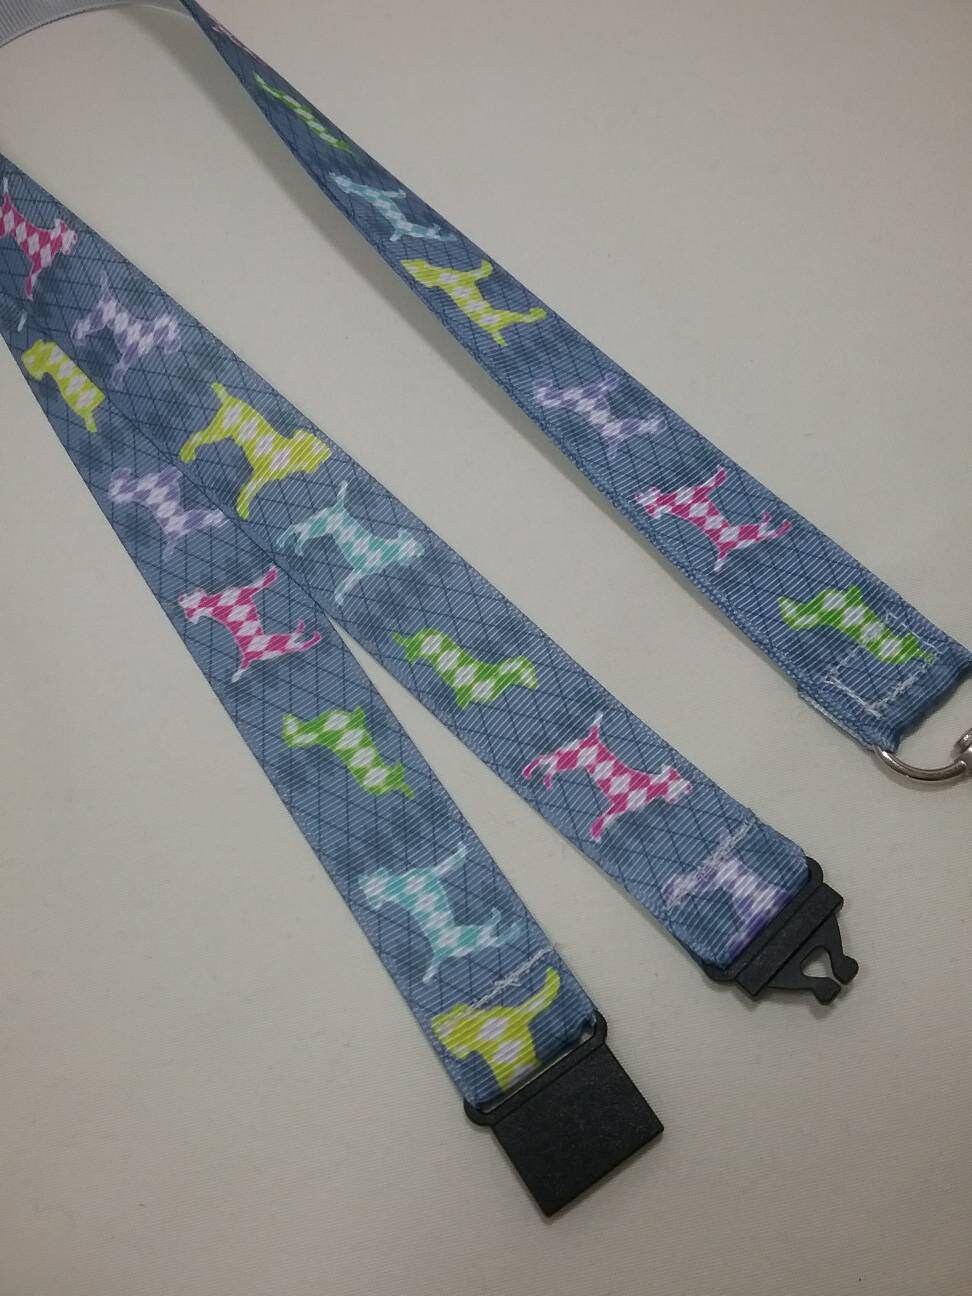 Lanyard Lots of Dogs Blue Ribbon ID Badge Whistle or Key - Etsy